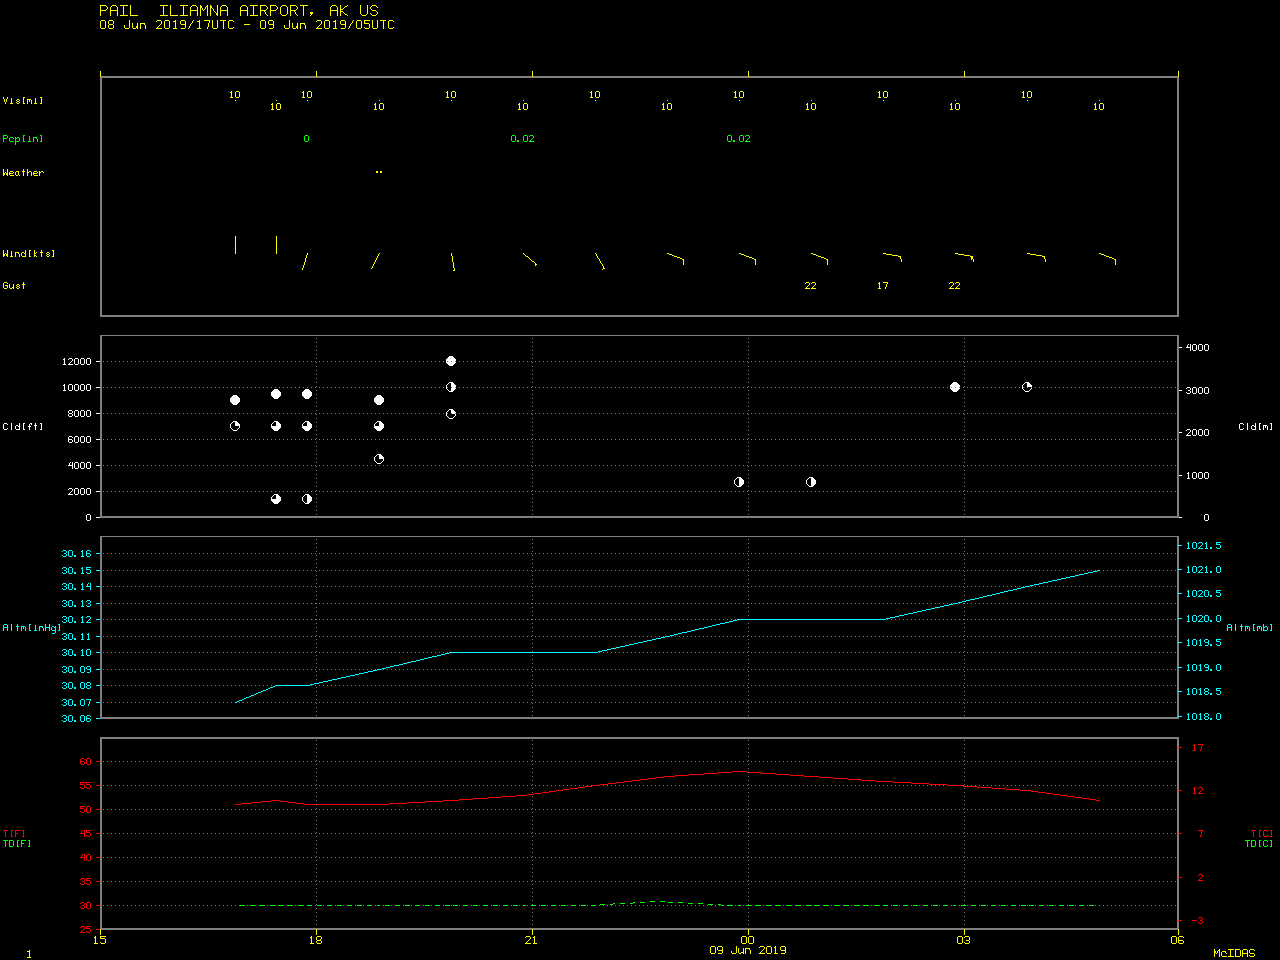 Time series plot of surface reports from Iliamna Airport [click to enlarge]